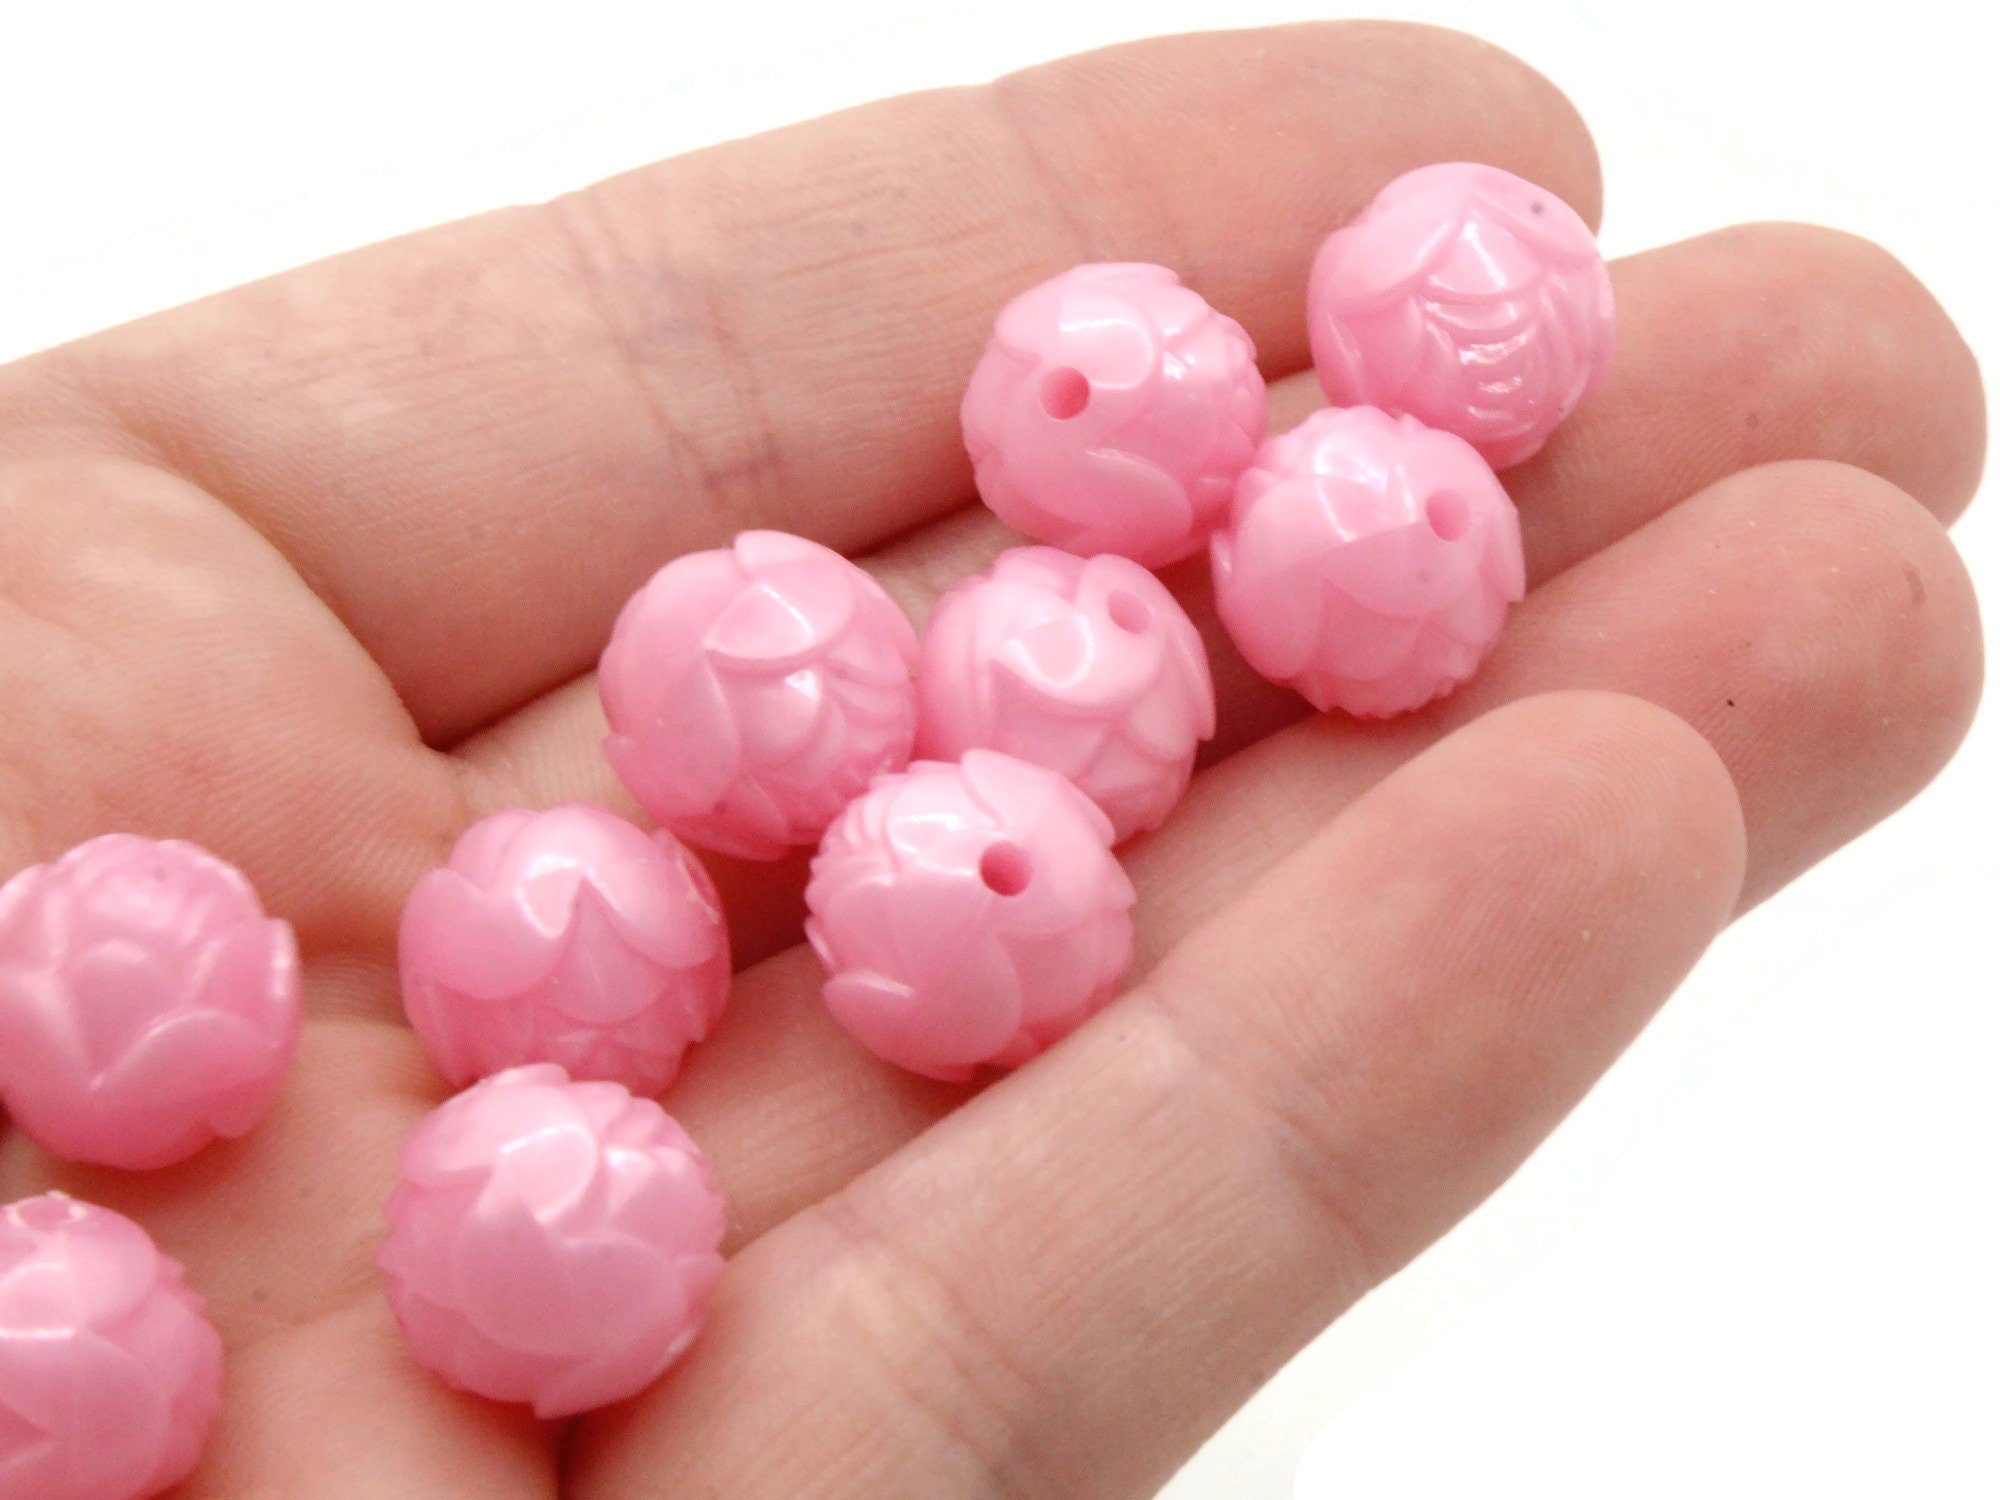 66Pcs Silicone Rose Flower Beads Set 12/ 15mm Pink White Silicone